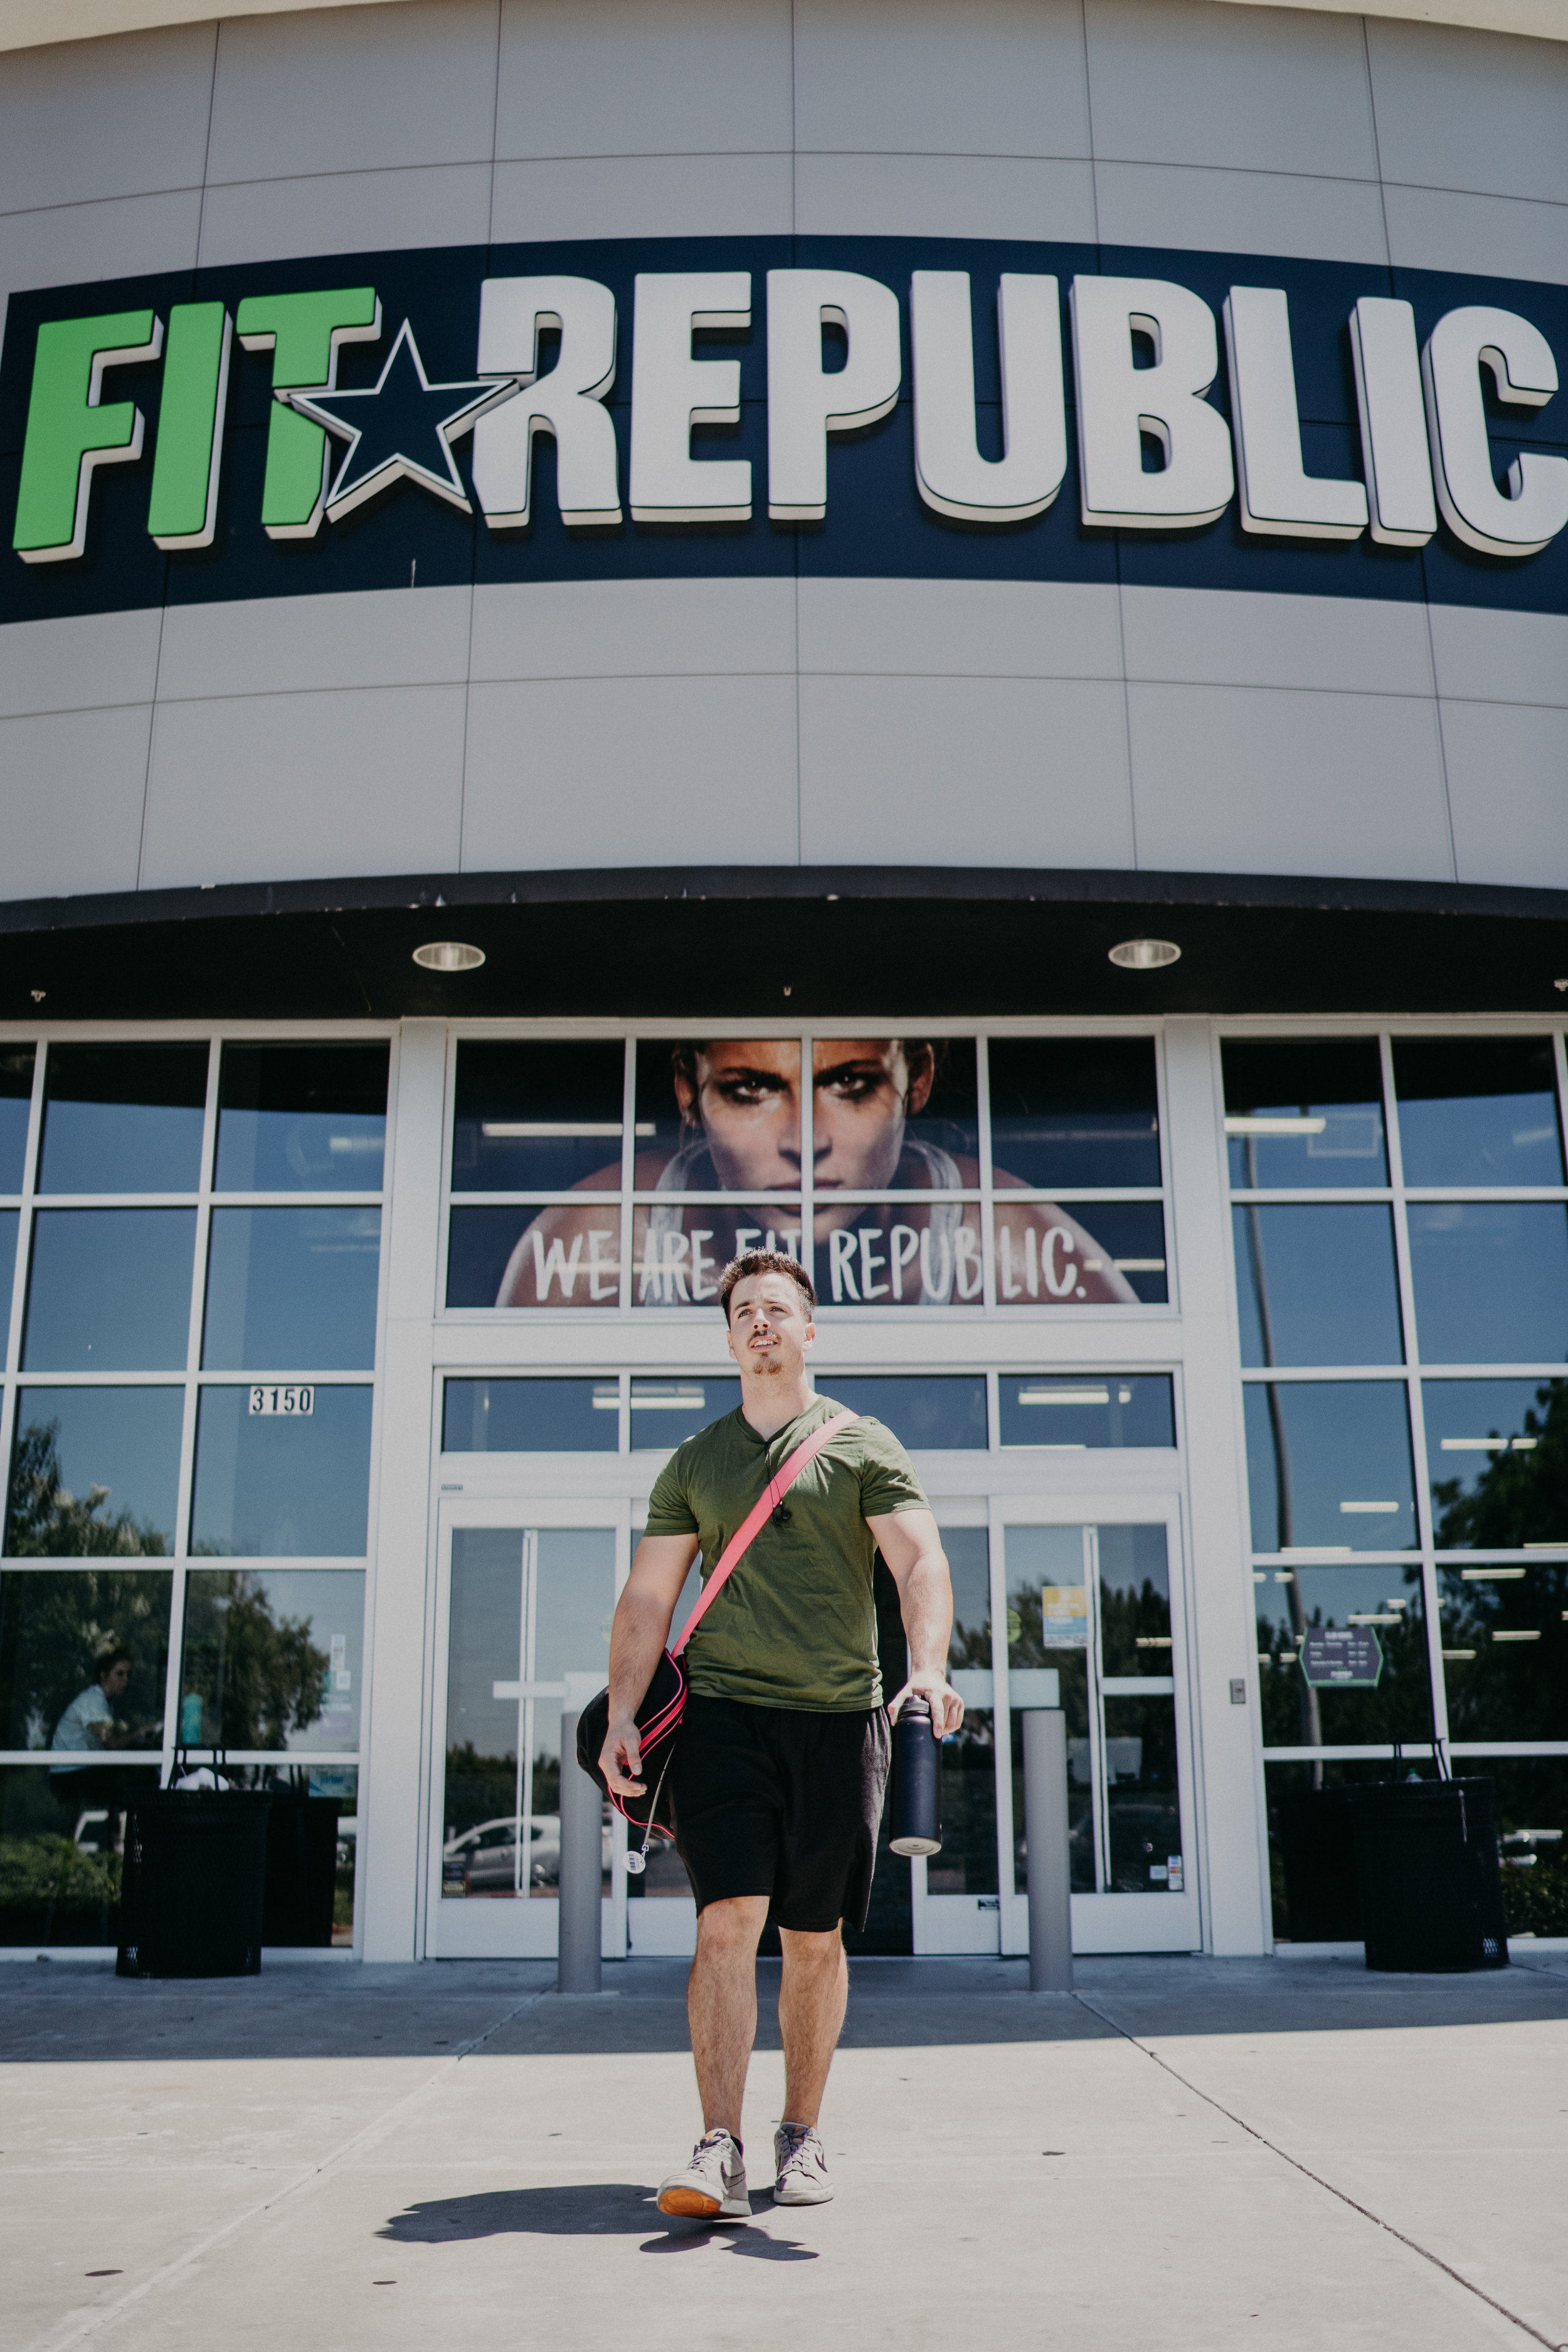  ⭑  Try Fit Republic Free   Talk is cheap, but once you experience what Fit Republic has to offer, we think we’ll be seeing more of you.   Get a Free Pass  